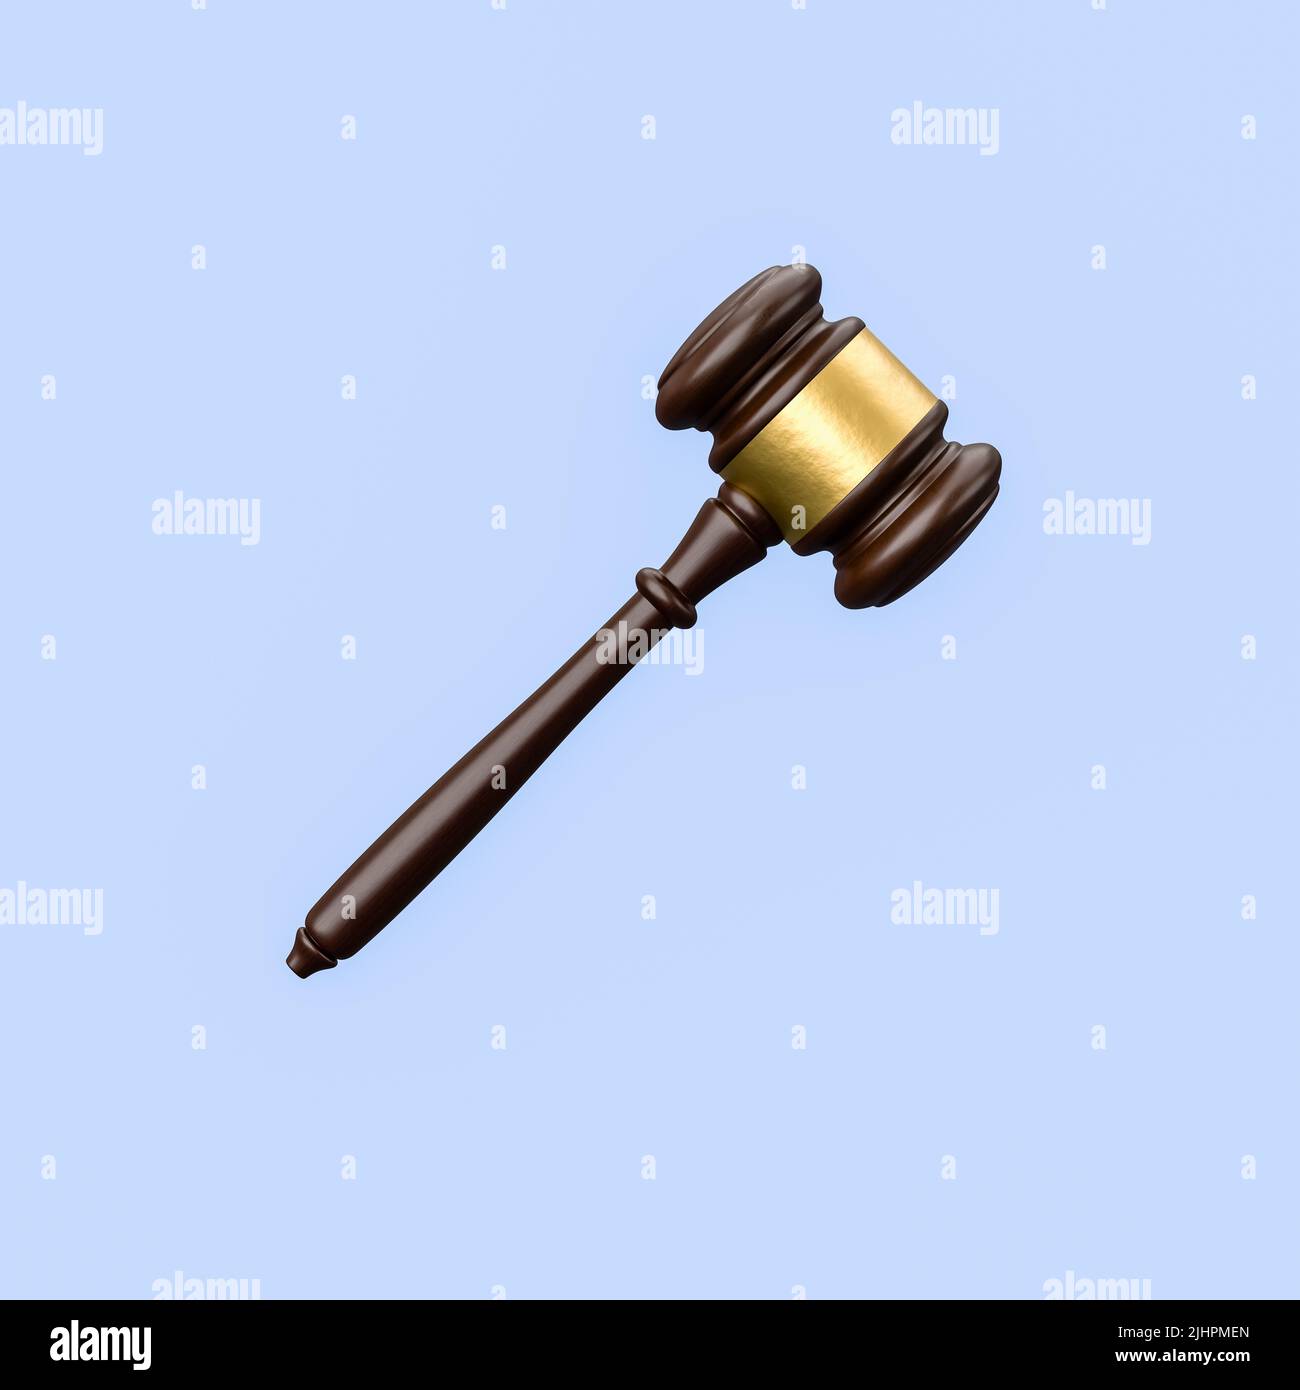 Judge's Gavel Isolated on Blue, Justice Concept Stock Photo